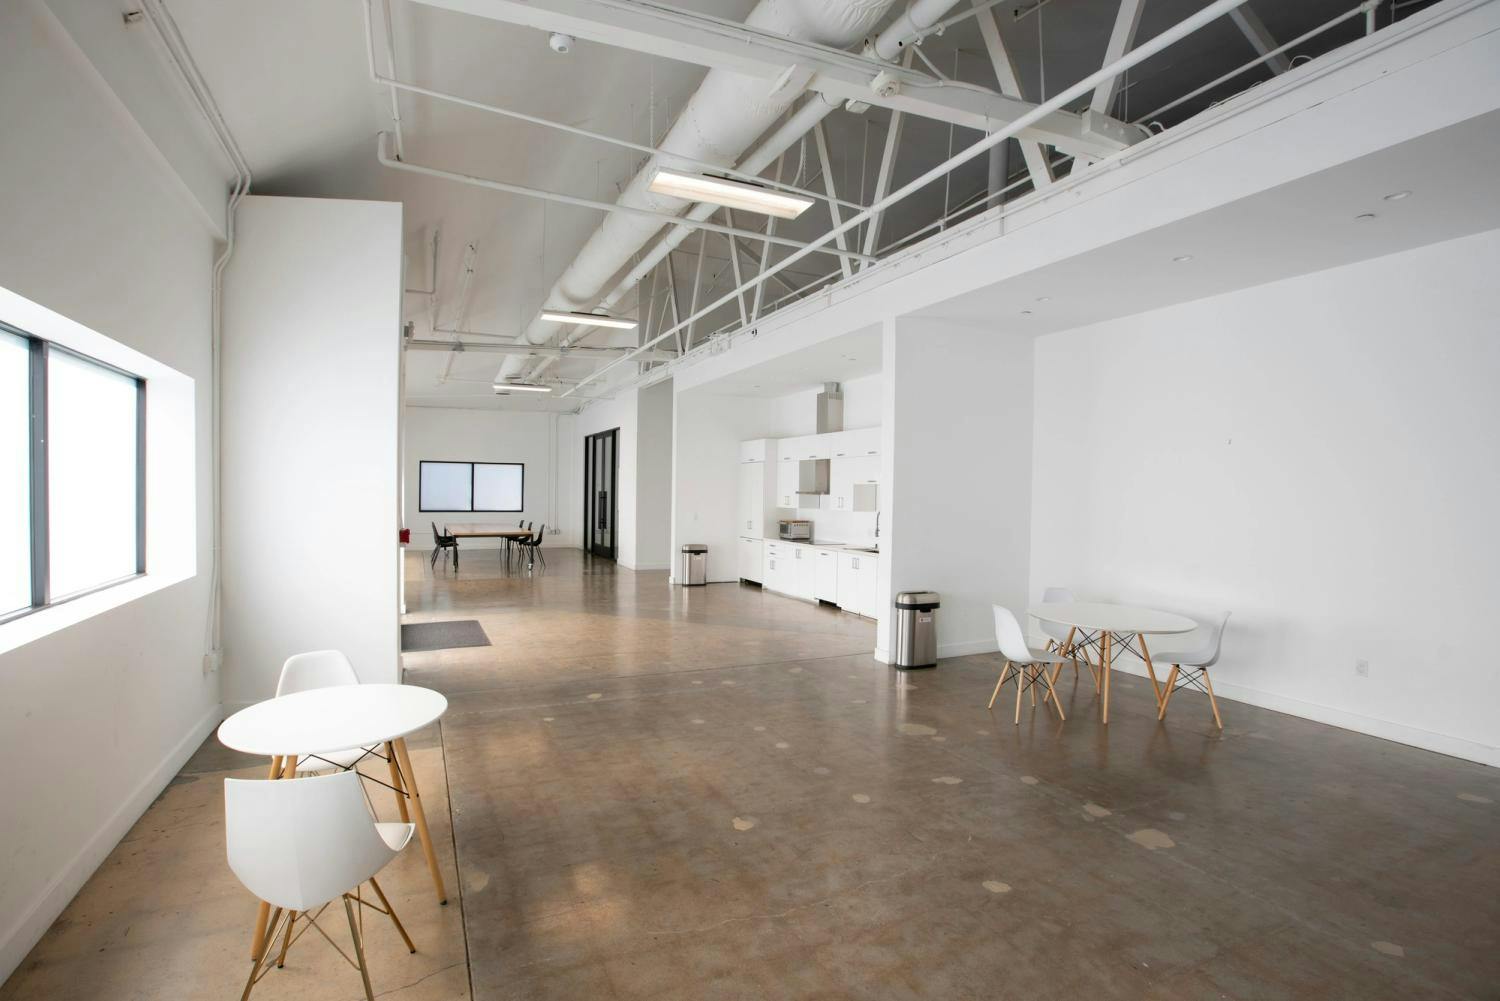 A clean and airy break area featuring a small round table with white chairs, a kitchenette, and a conference room in the background, in a modern studio space with high ceilings.